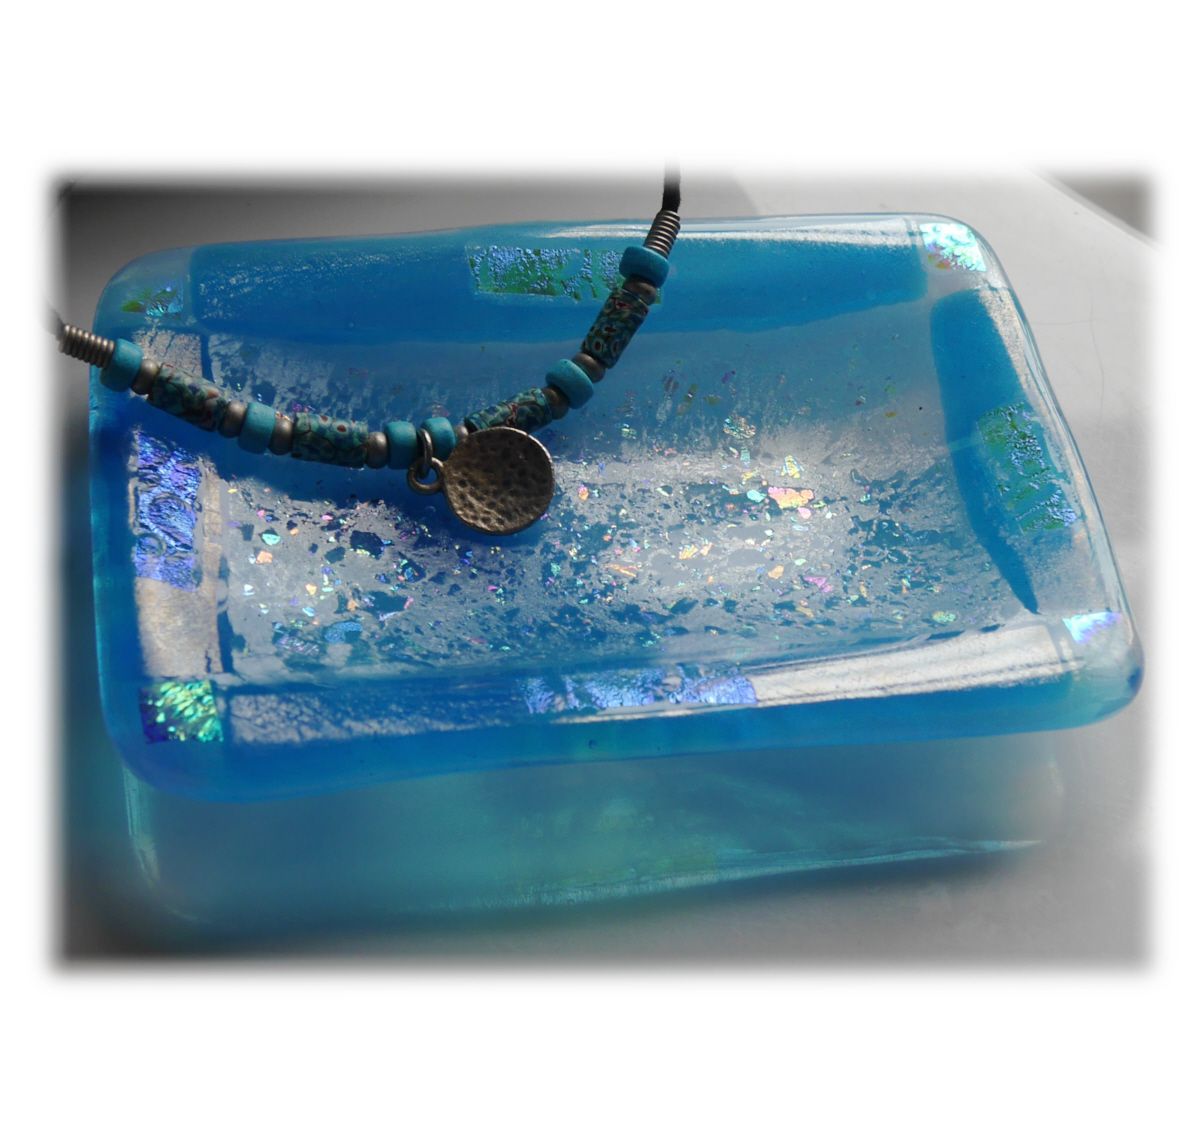 Soap Dish 013 Turquoise dichroic 1907 FREE 12.00